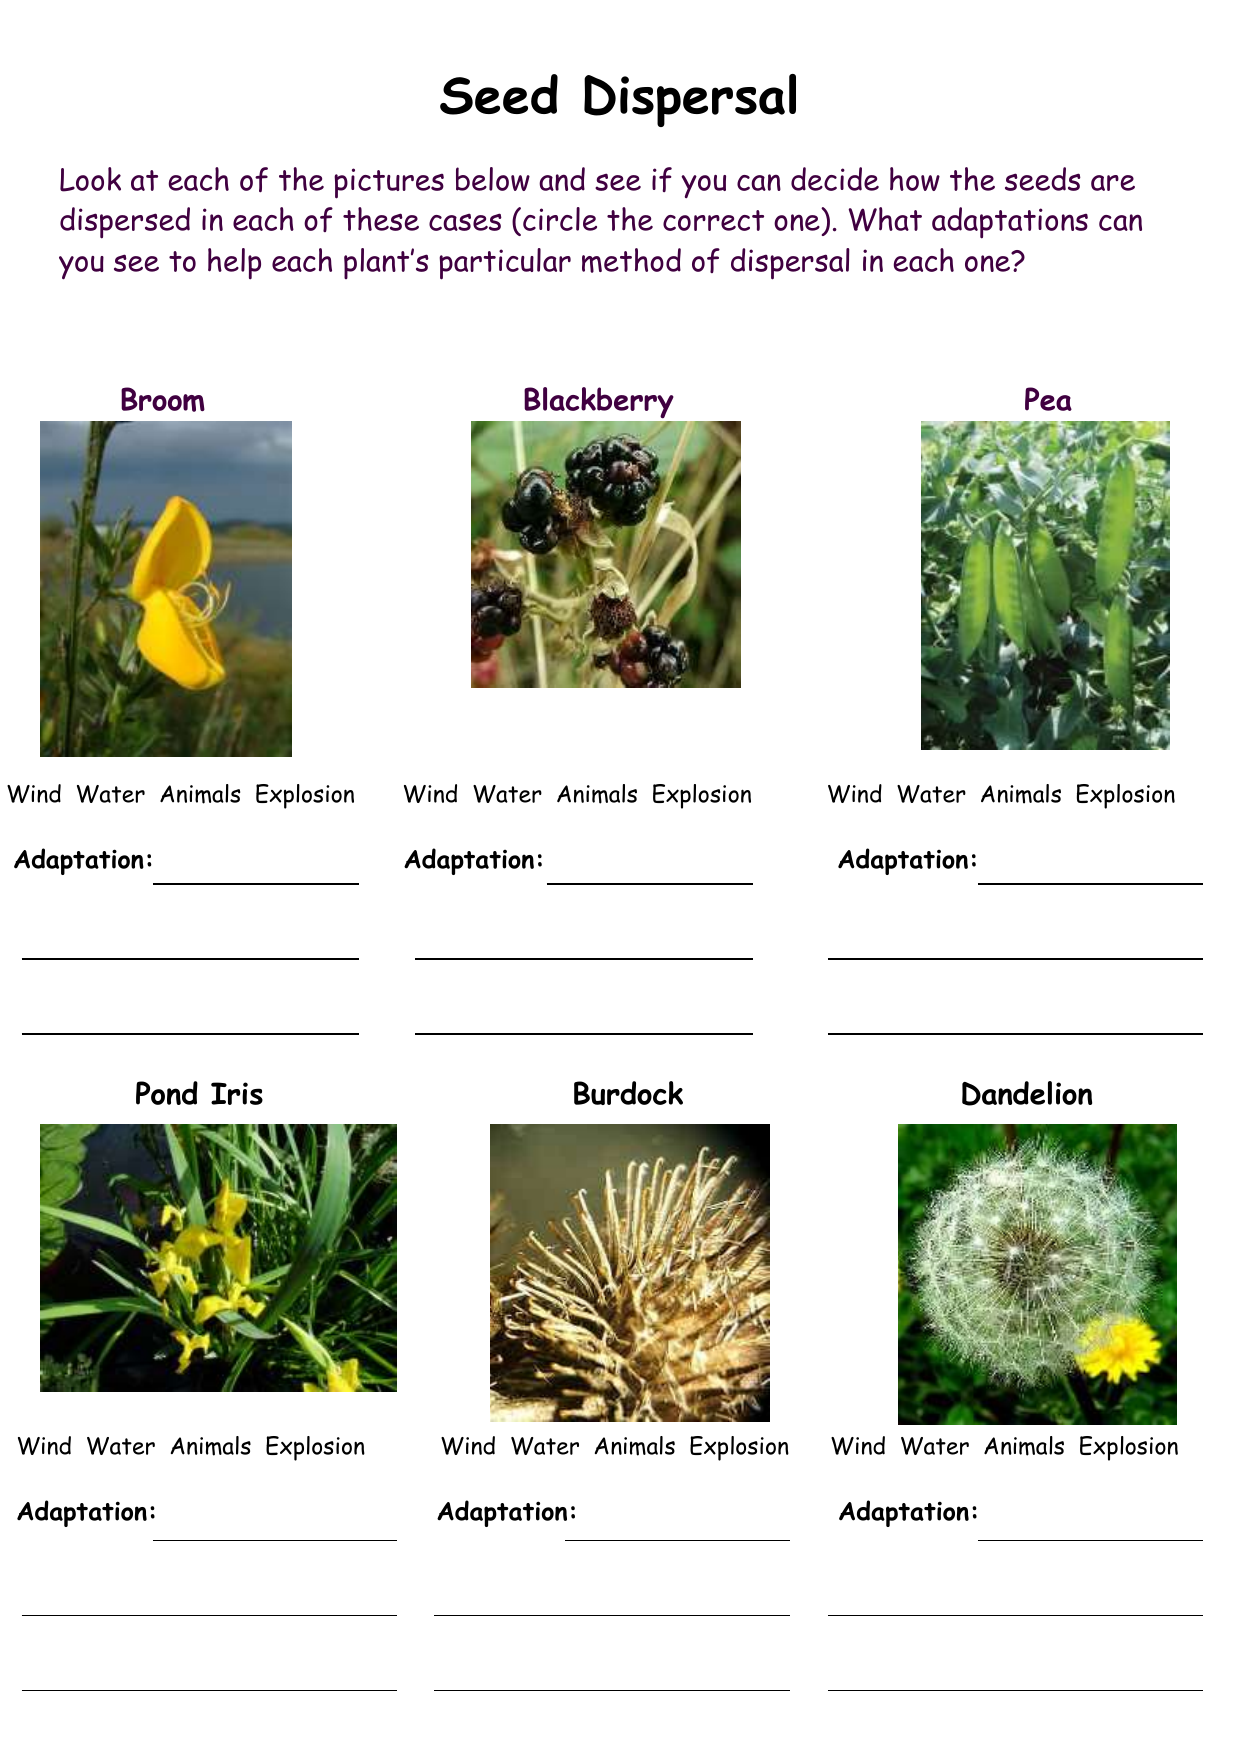 Seed dispersal activity